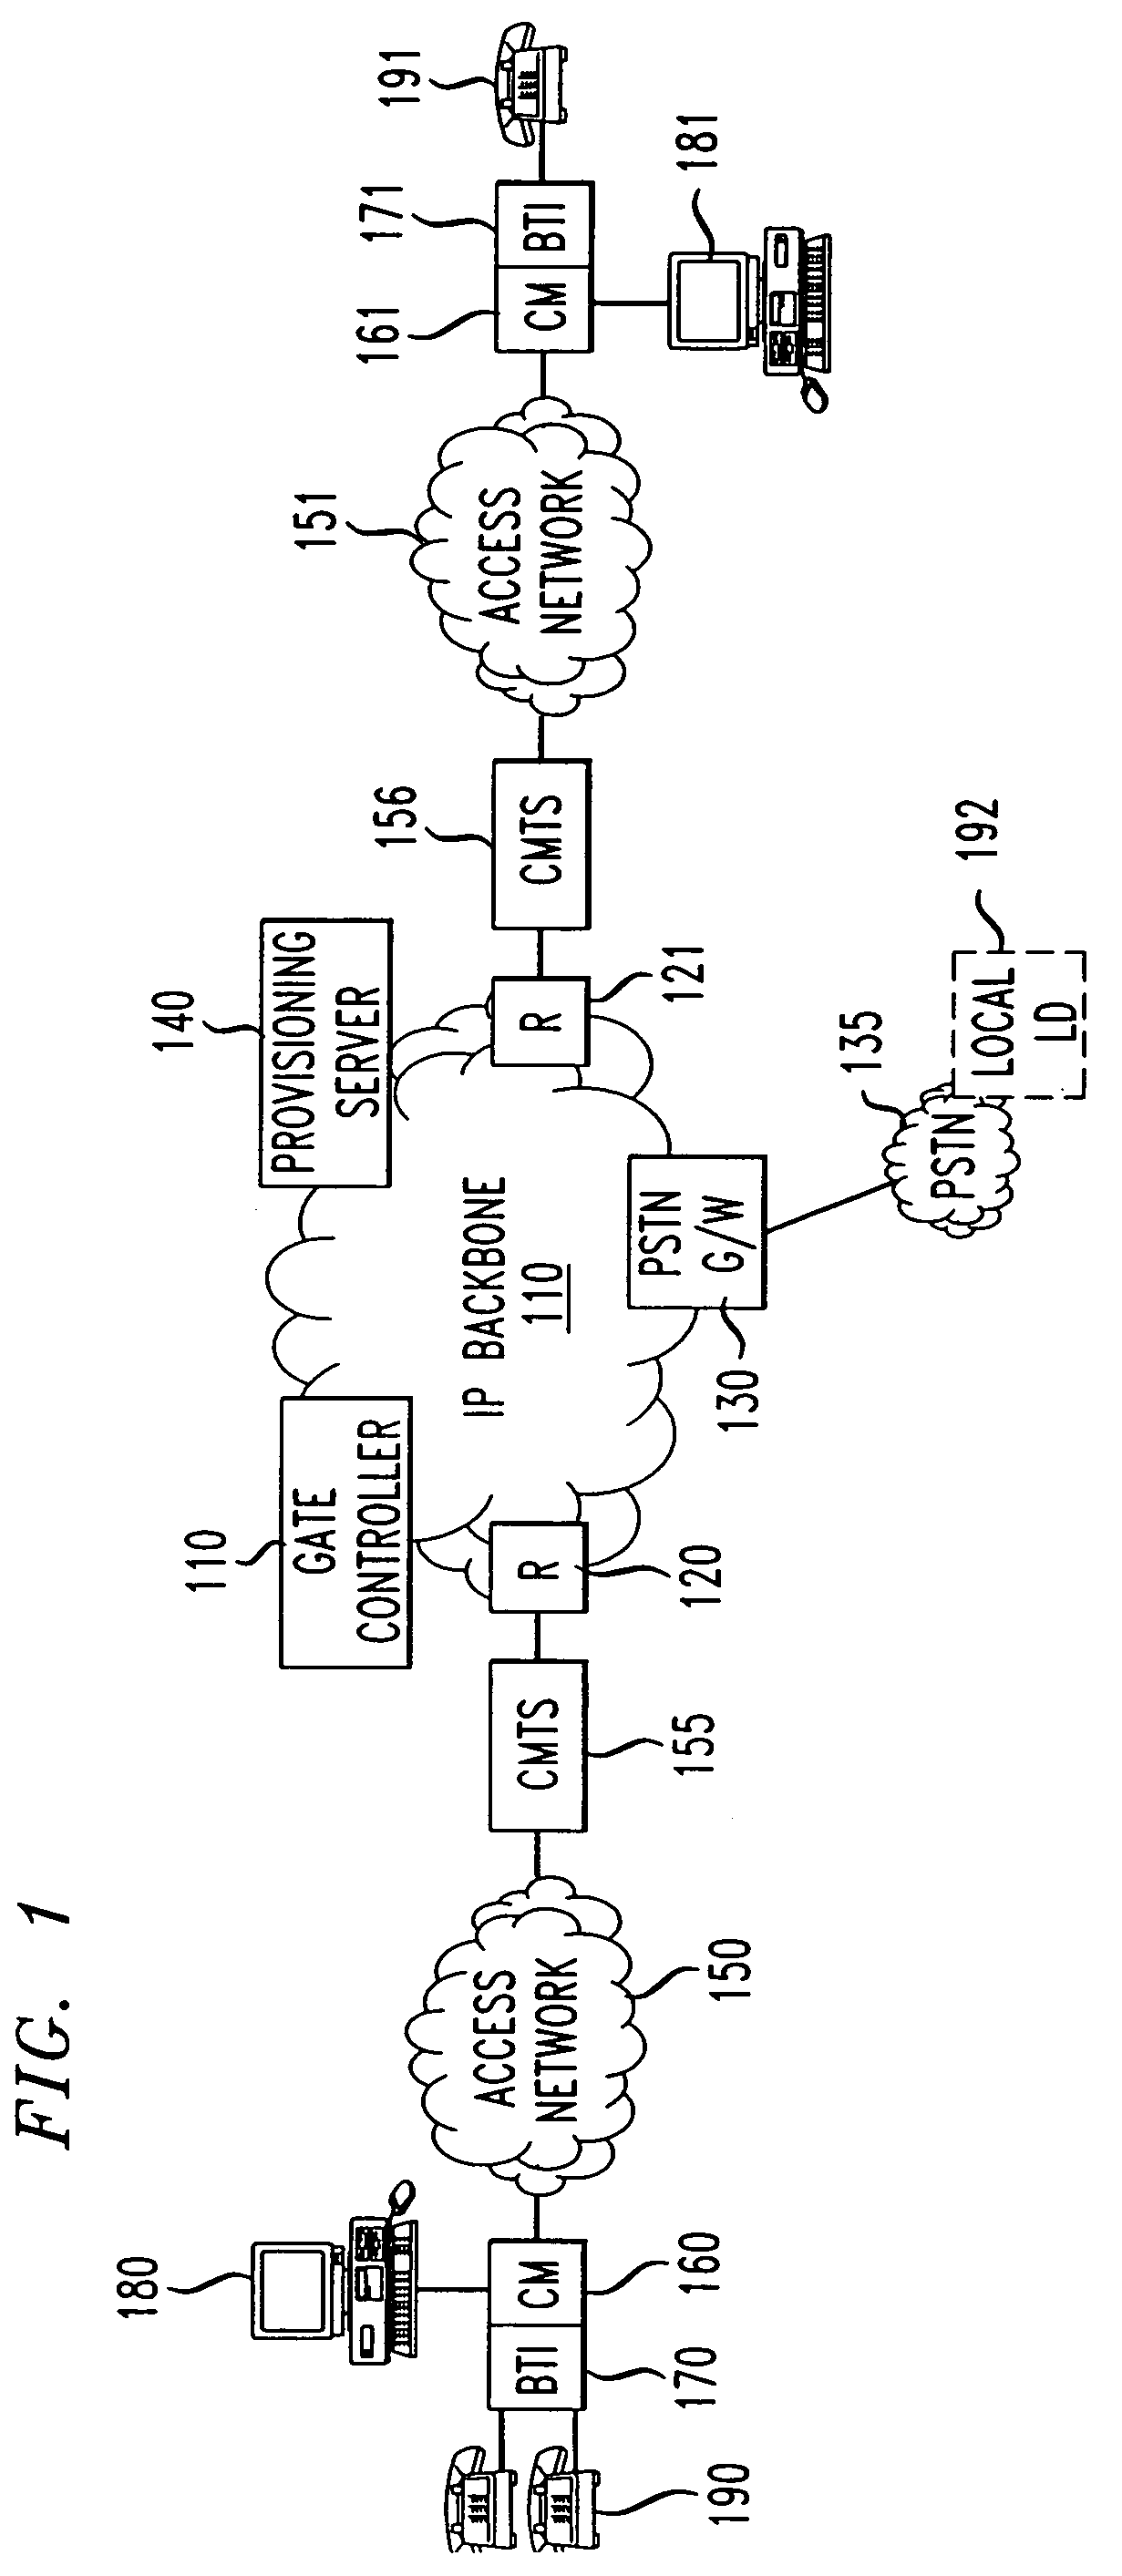 Method and apparatus for enhanced security in a broadband telephony network